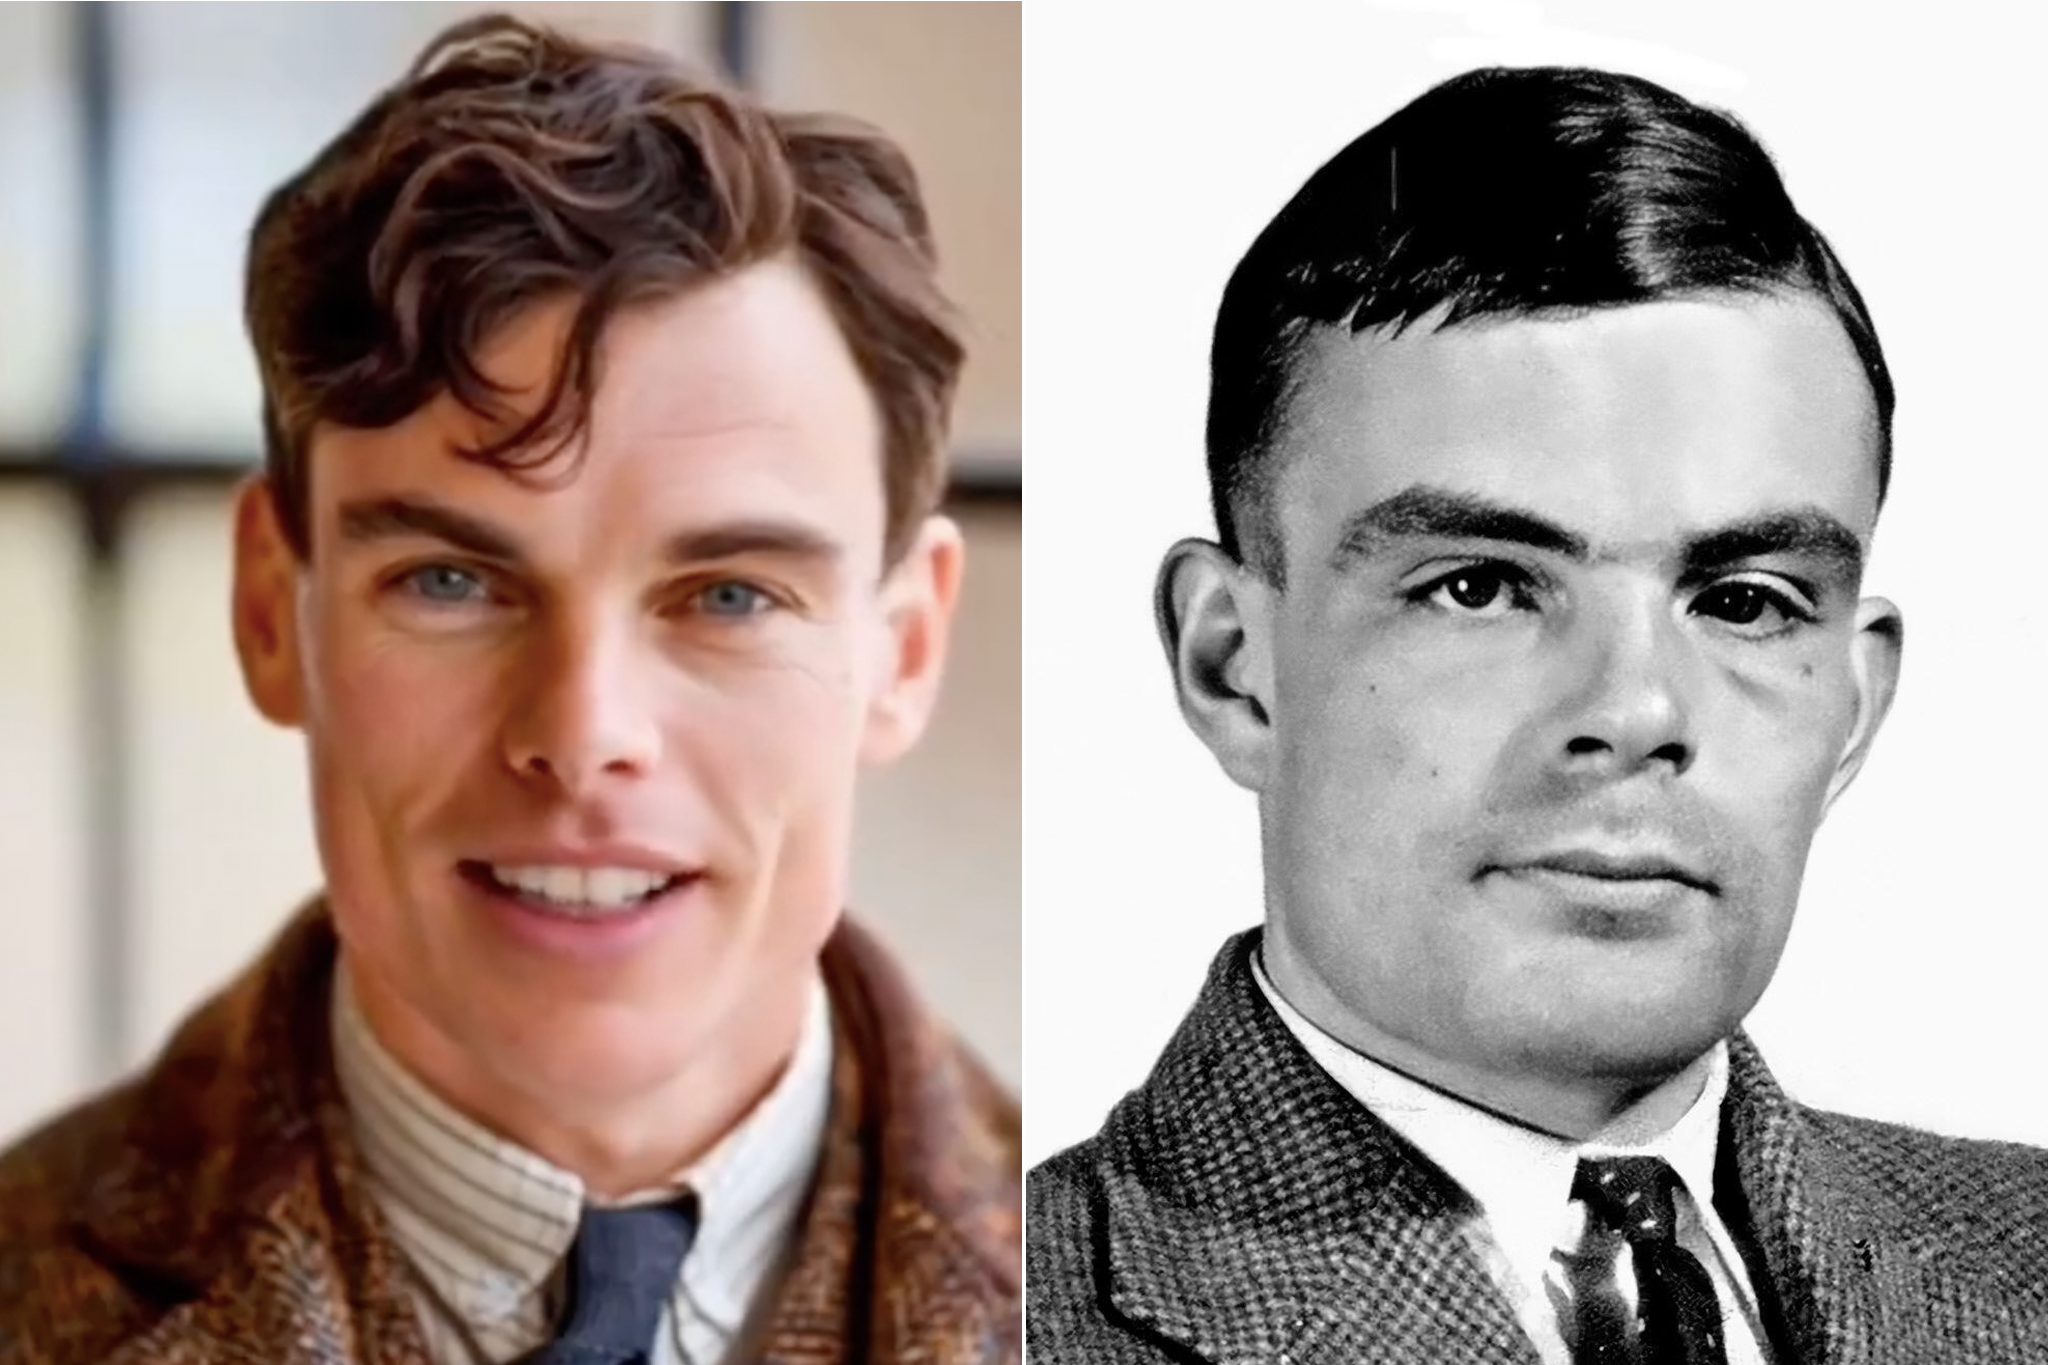 Alan Turing – the British mathematician who helped the Allies crack the Enigma code – appears in an advert as an avatar